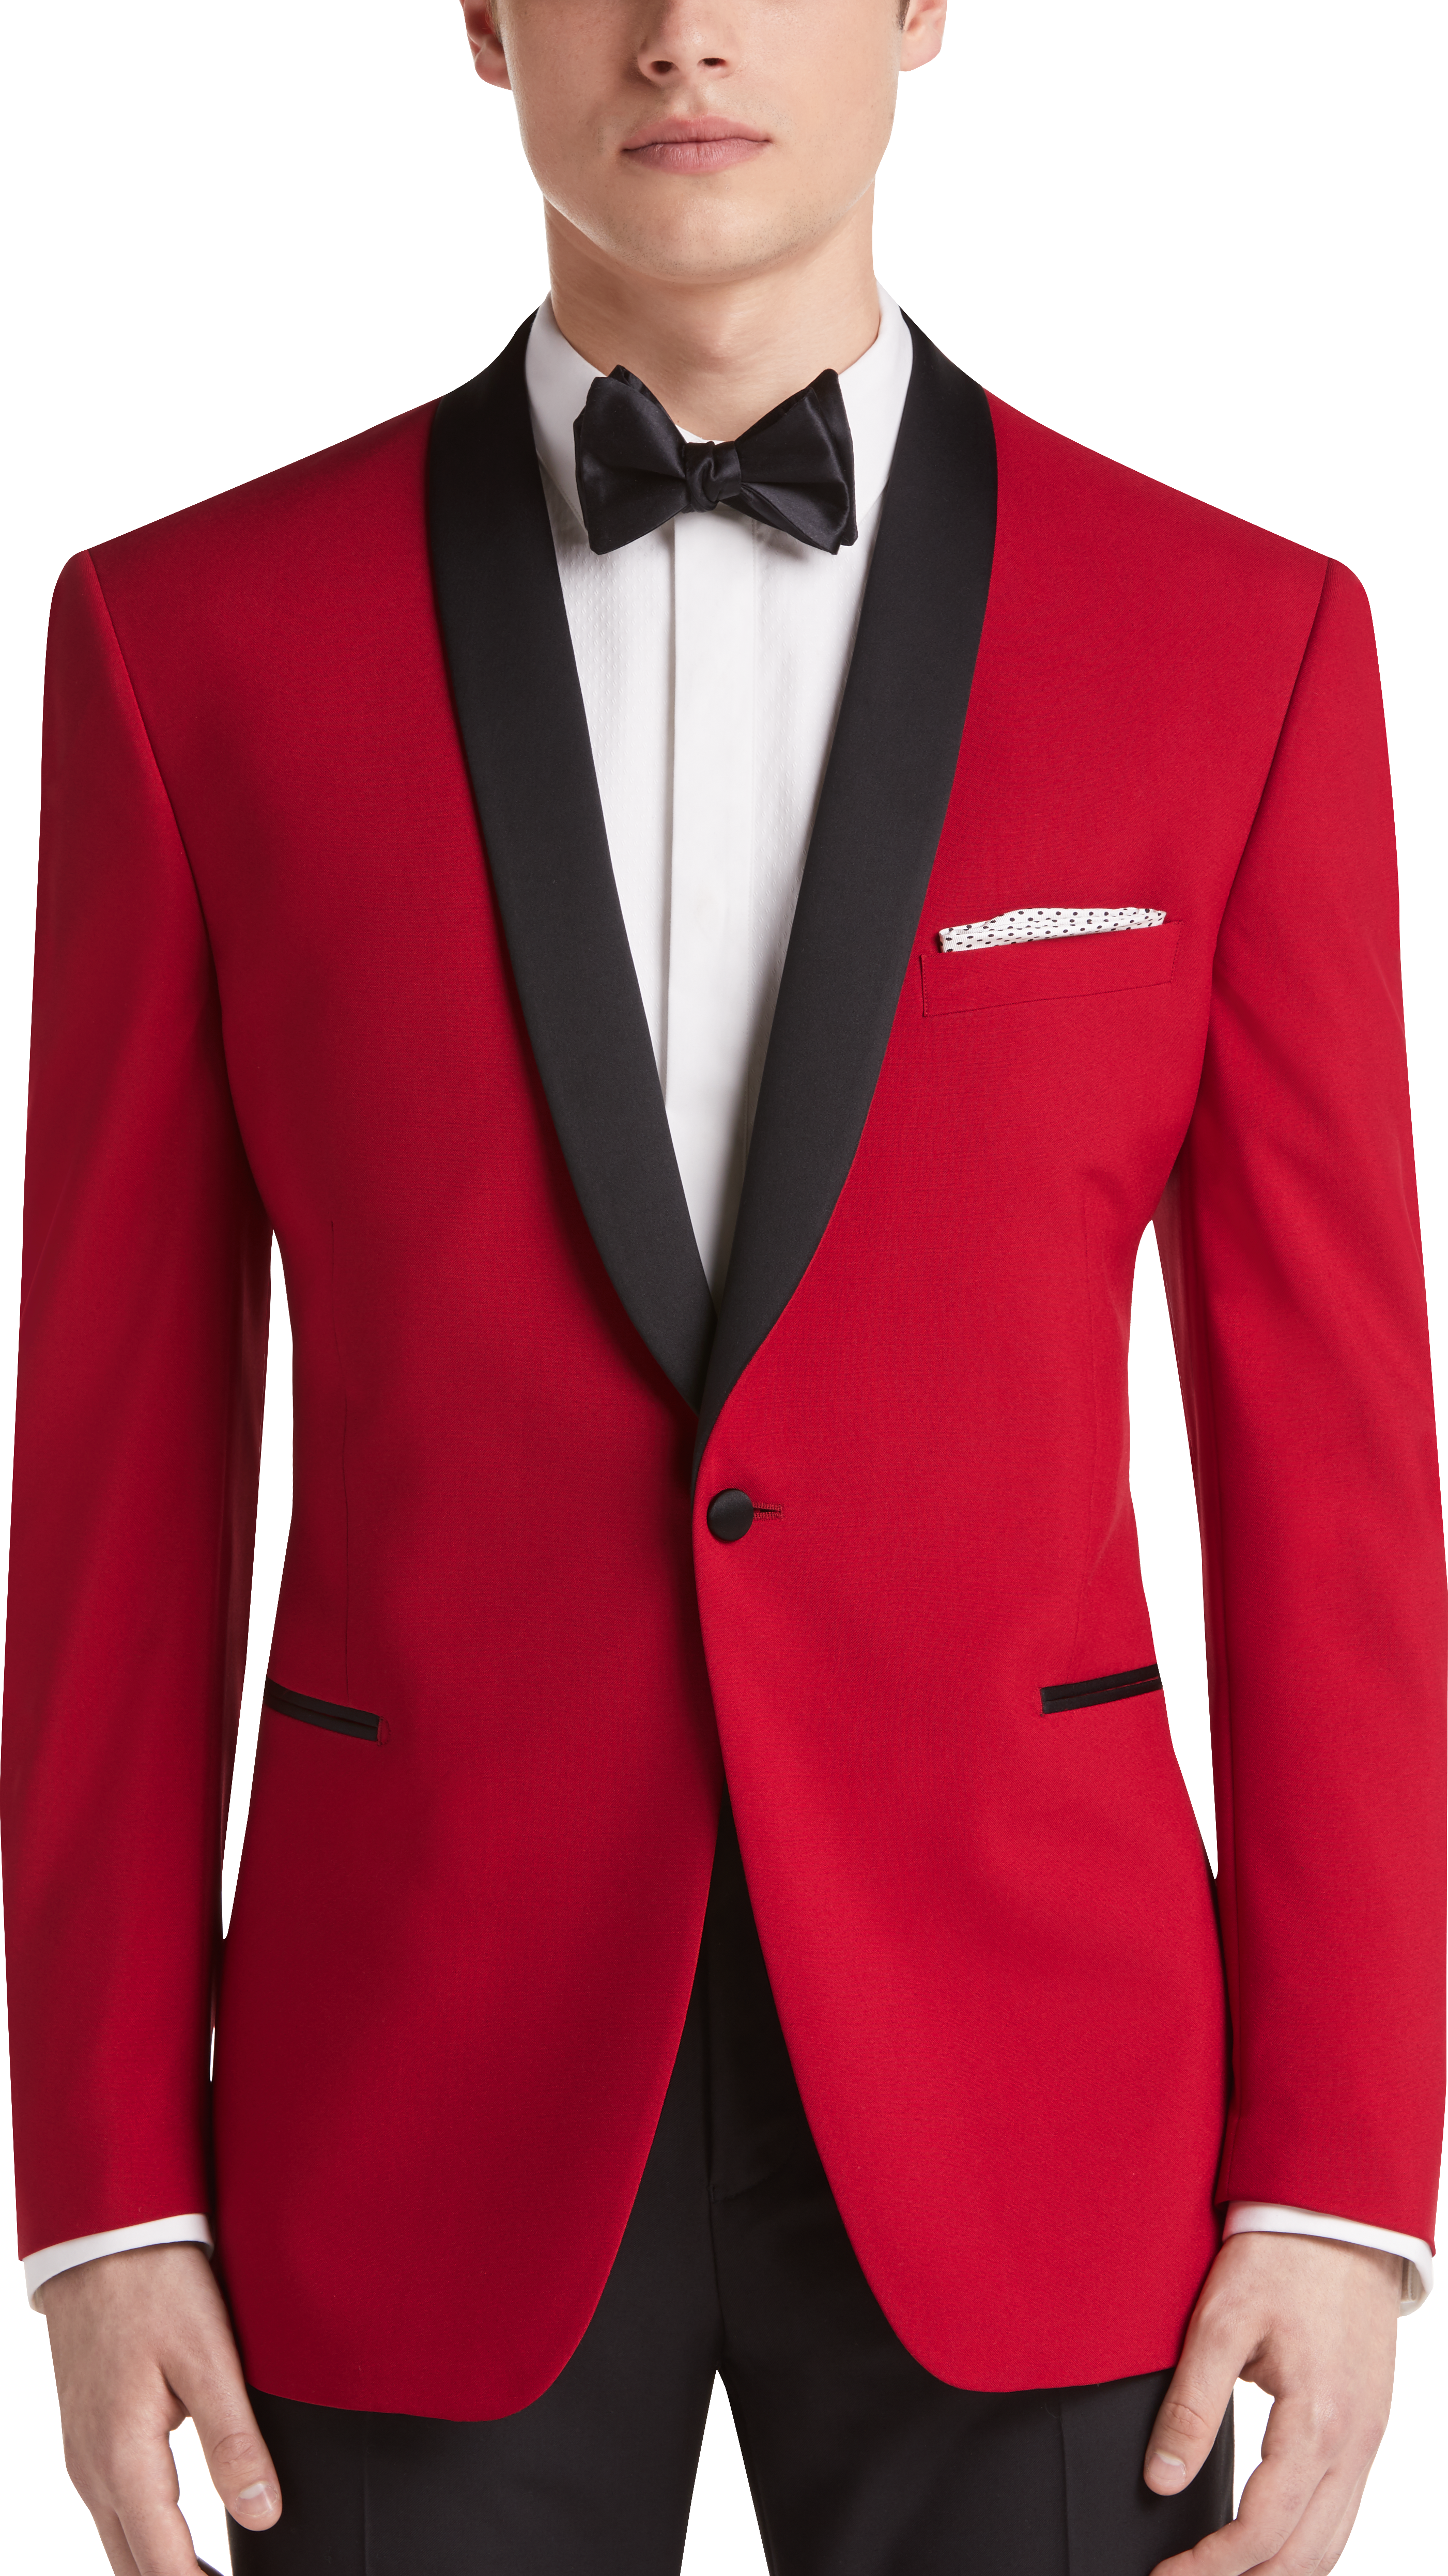 Free shipping on posting reviews Mens Red suit jacket gumex.hu